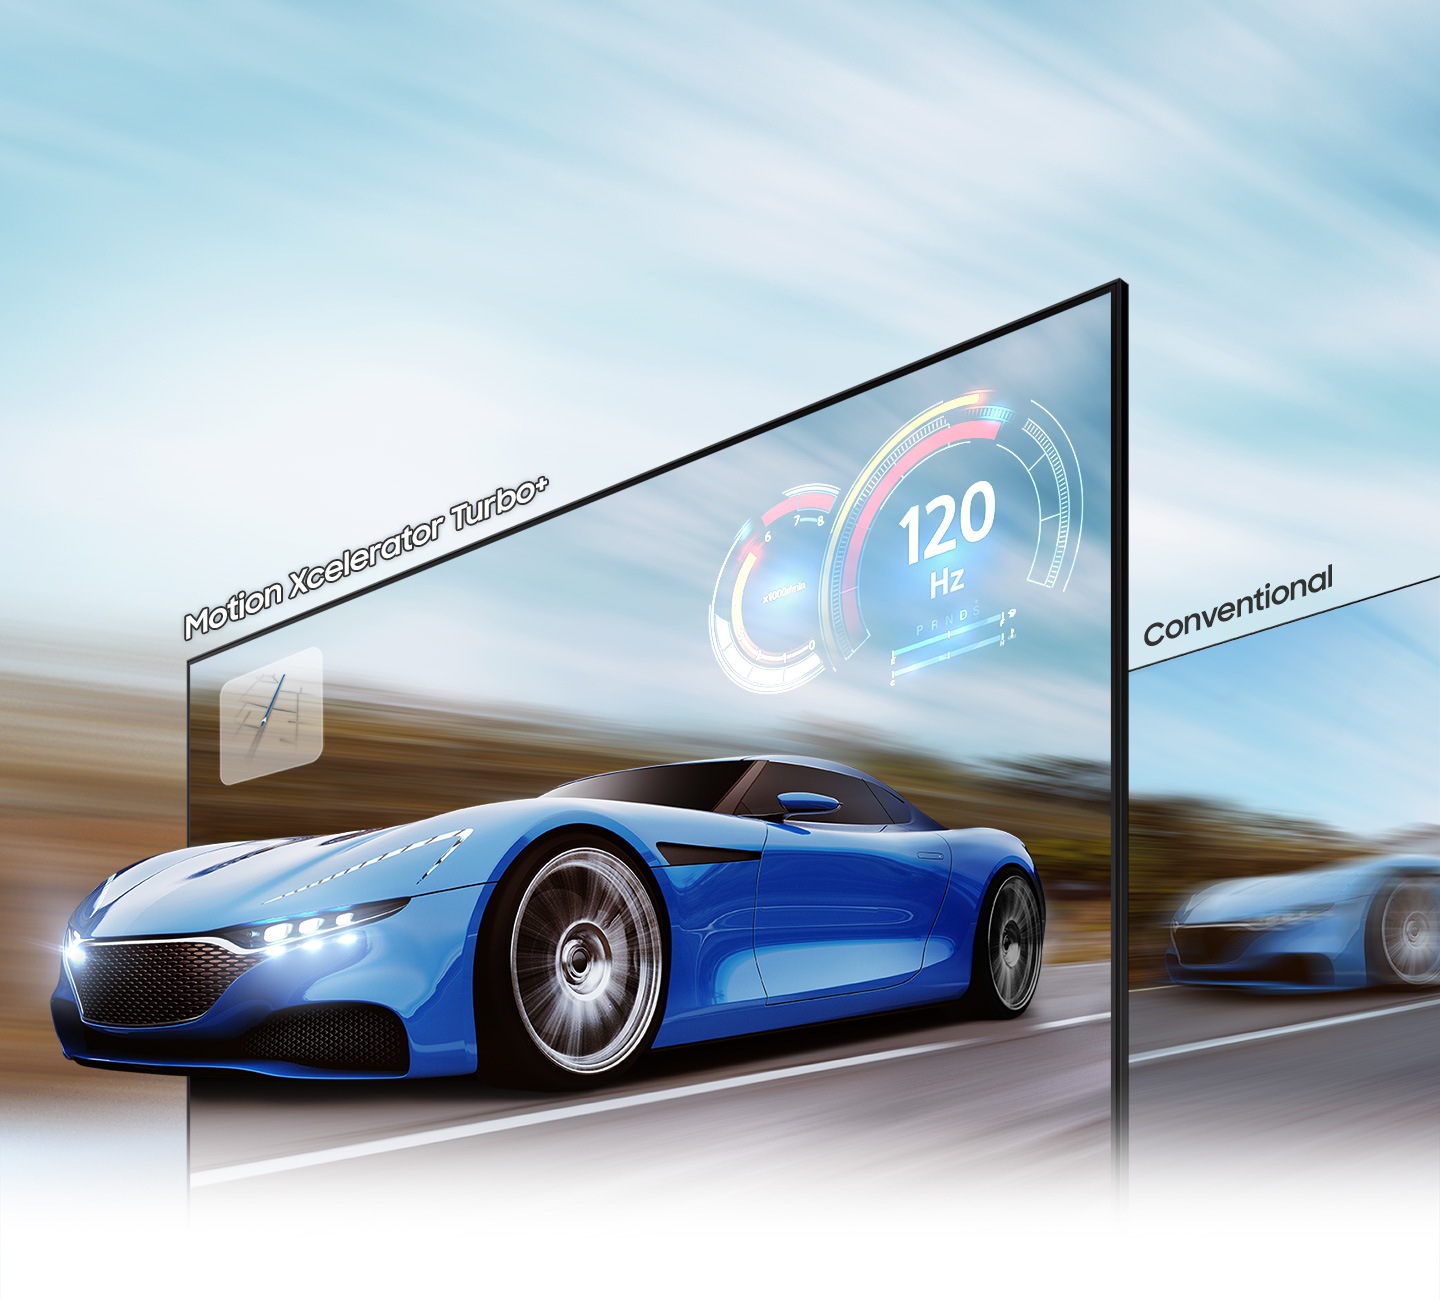 A racing car on the TV screen looks clearer and more visible on the QLED TV than on conventional TV due to motion xcelerator turbo + technology up to 4K 120Hz.